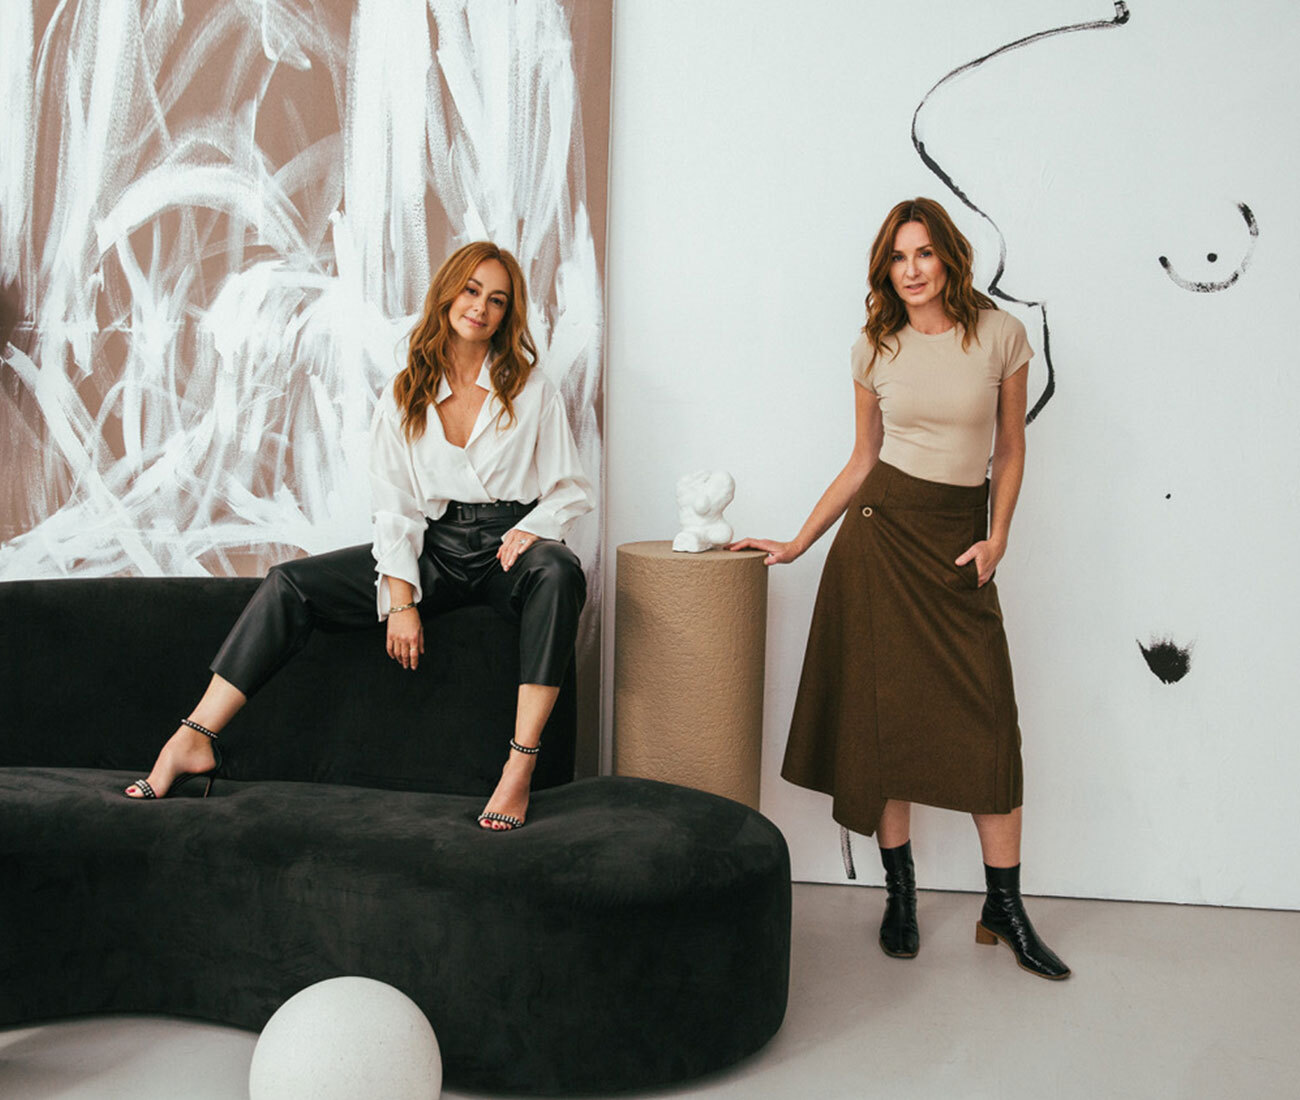 A shared passion for design saw friends Muriel Solomon, left, and Blok Design founder Vanessa Eckstein, combine their shared strengths in førs studio.